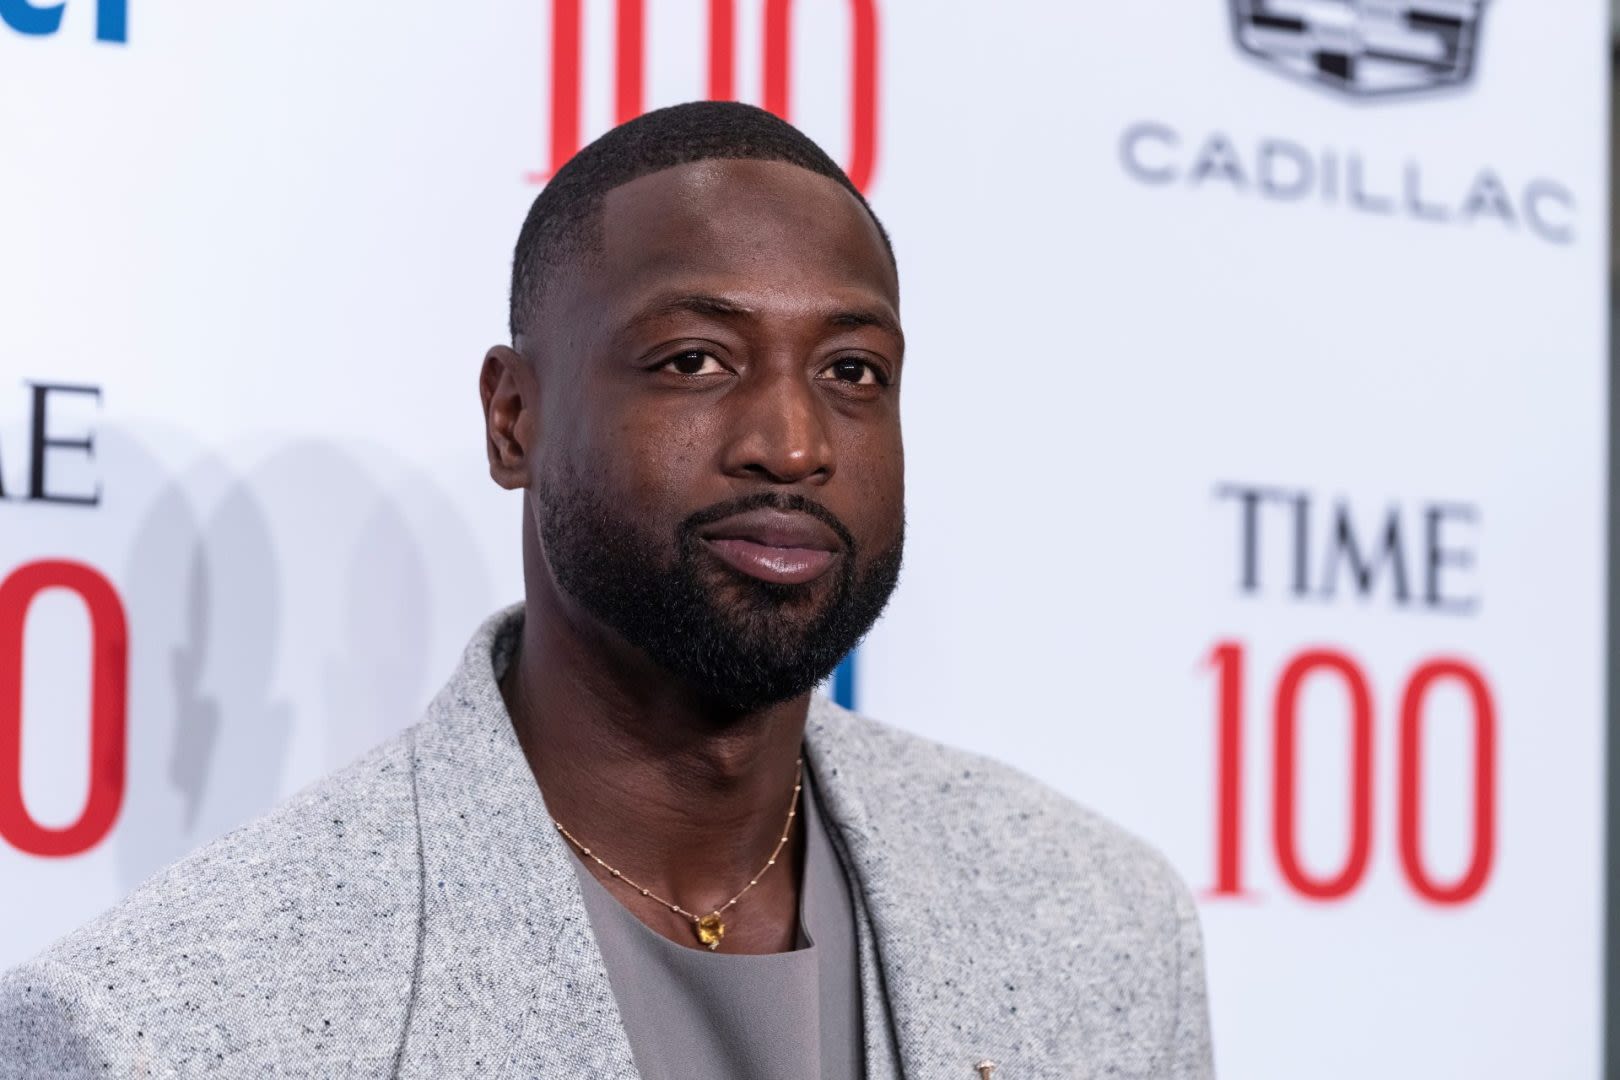 Dwyane Wade grilled for wanting to start nail care line